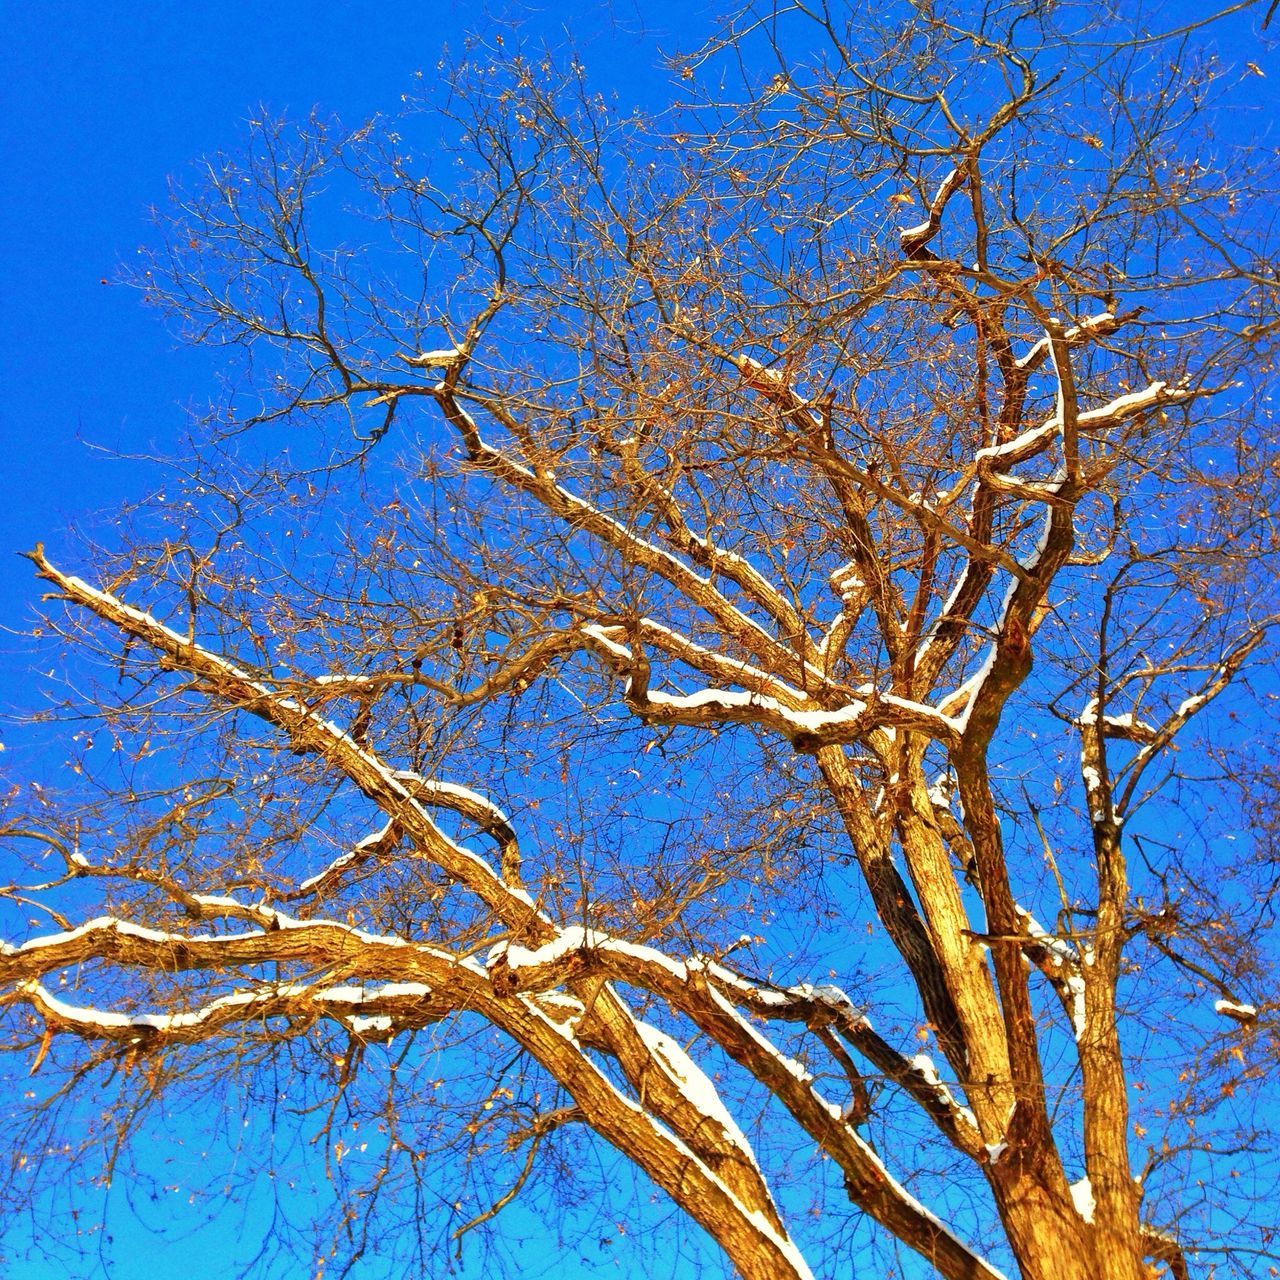 blue, bare tree, branch, tree, low angle view, clear sky, nature, tranquility, growth, beauty in nature, sky, tree trunk, day, outdoors, scenics, no people, dead plant, sunlight, tranquil scene, dry